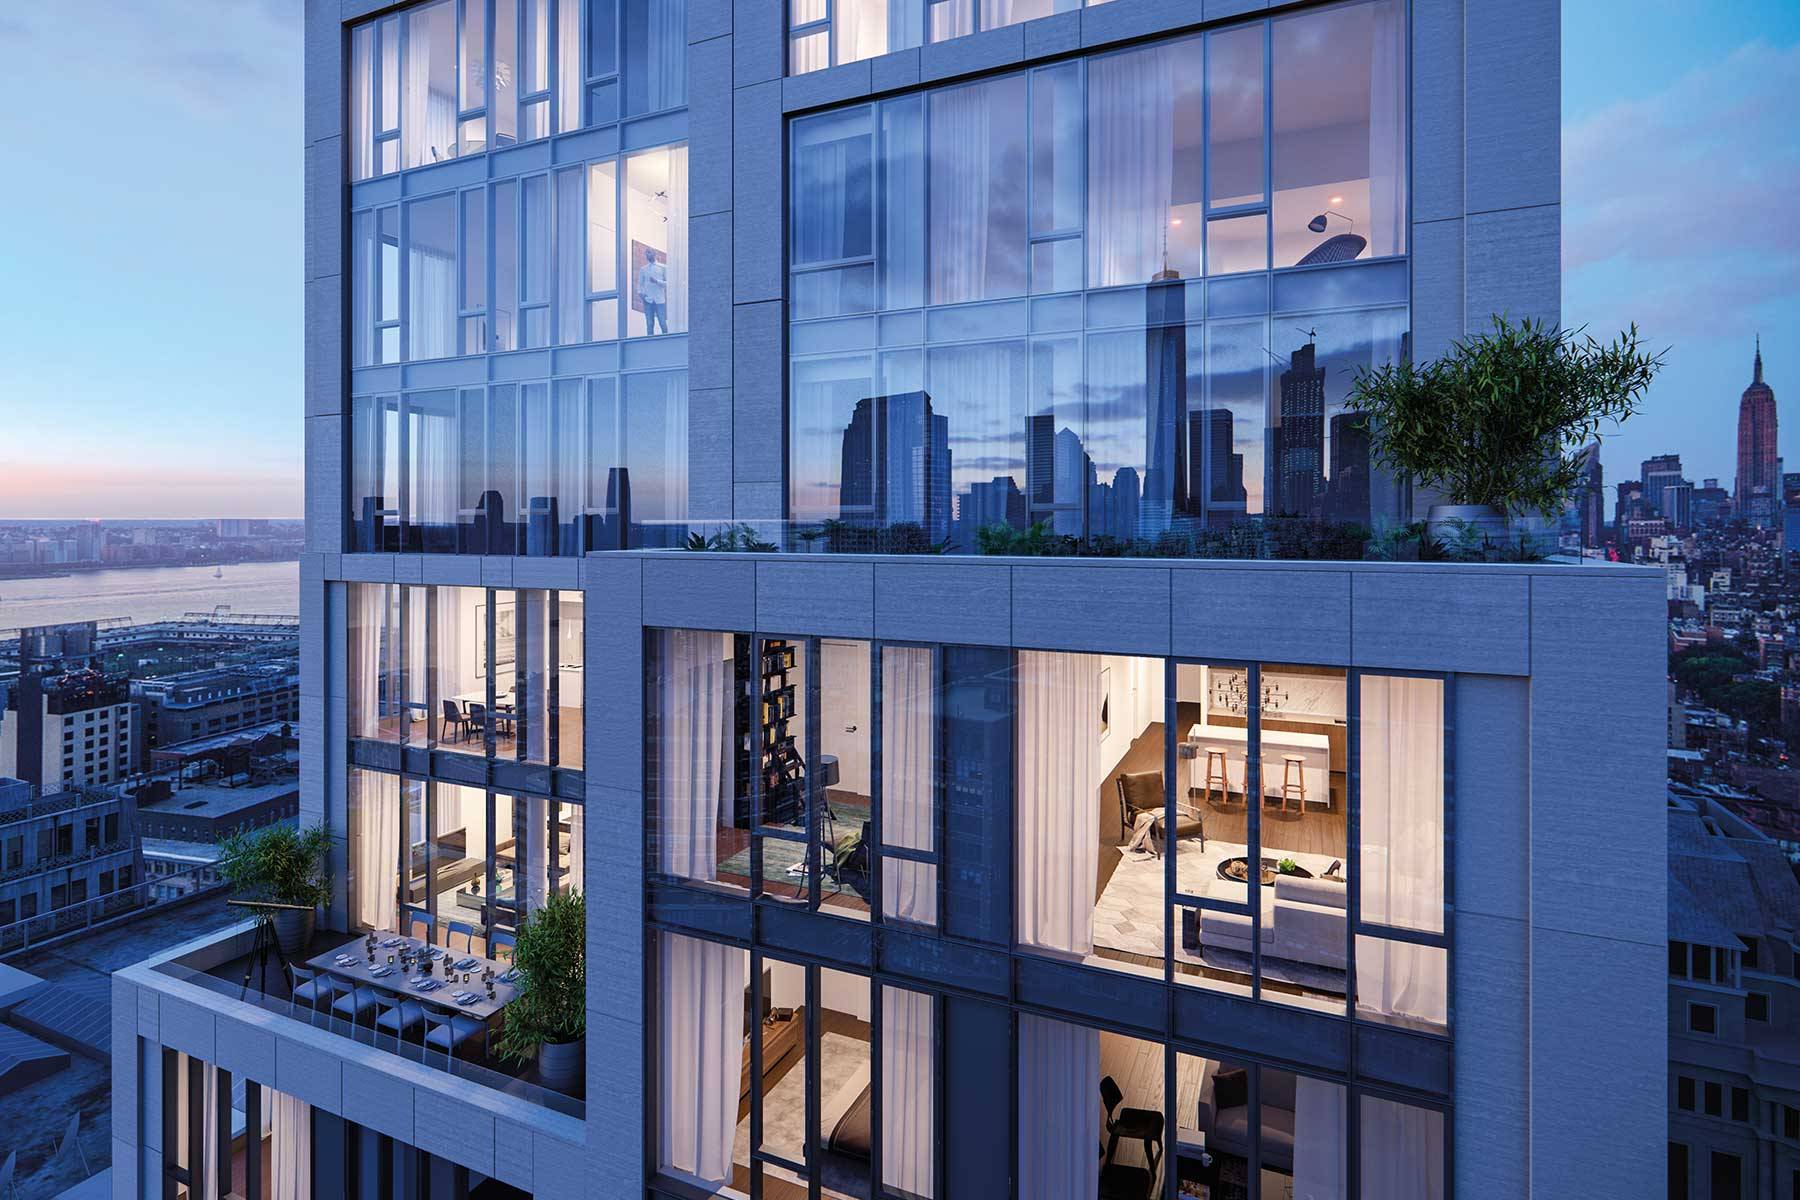 570 Broome is a collection of fifty four contemporary residences that draw inspiration from the history and style of West SoHo.